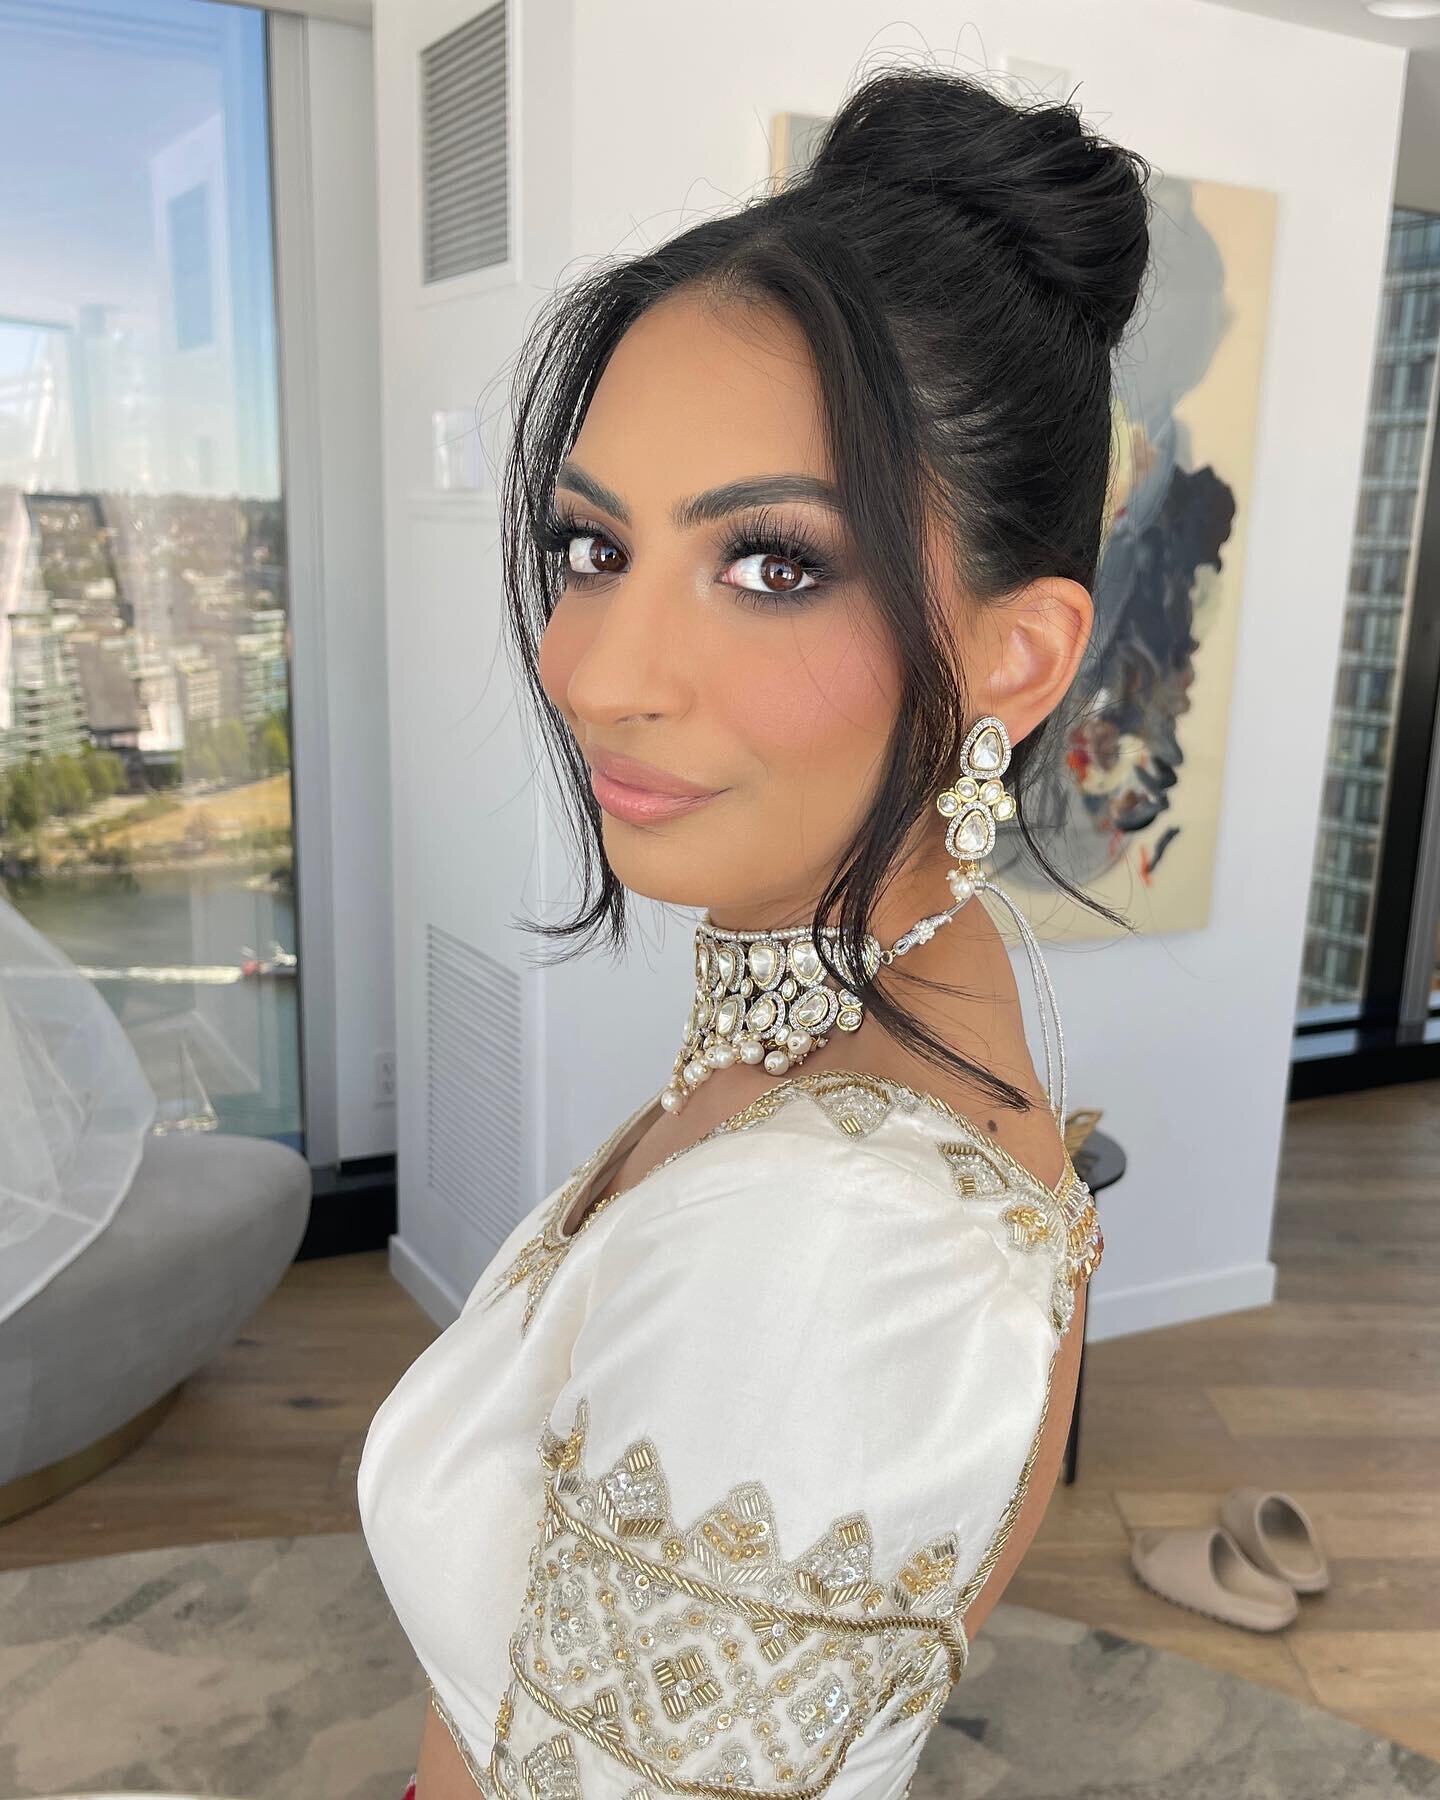 the finale ⚡️✨🪩 

Thank you @harmit.panesar for trusting me with all of your looks this past week! 🦋

&bull;
&bull;
&bull;

#vancouvermakeupartist 
#langleymakeupartist #vancouverweddings #lasvegasmakeupartist #vancouvereventplanner #naturalglambri